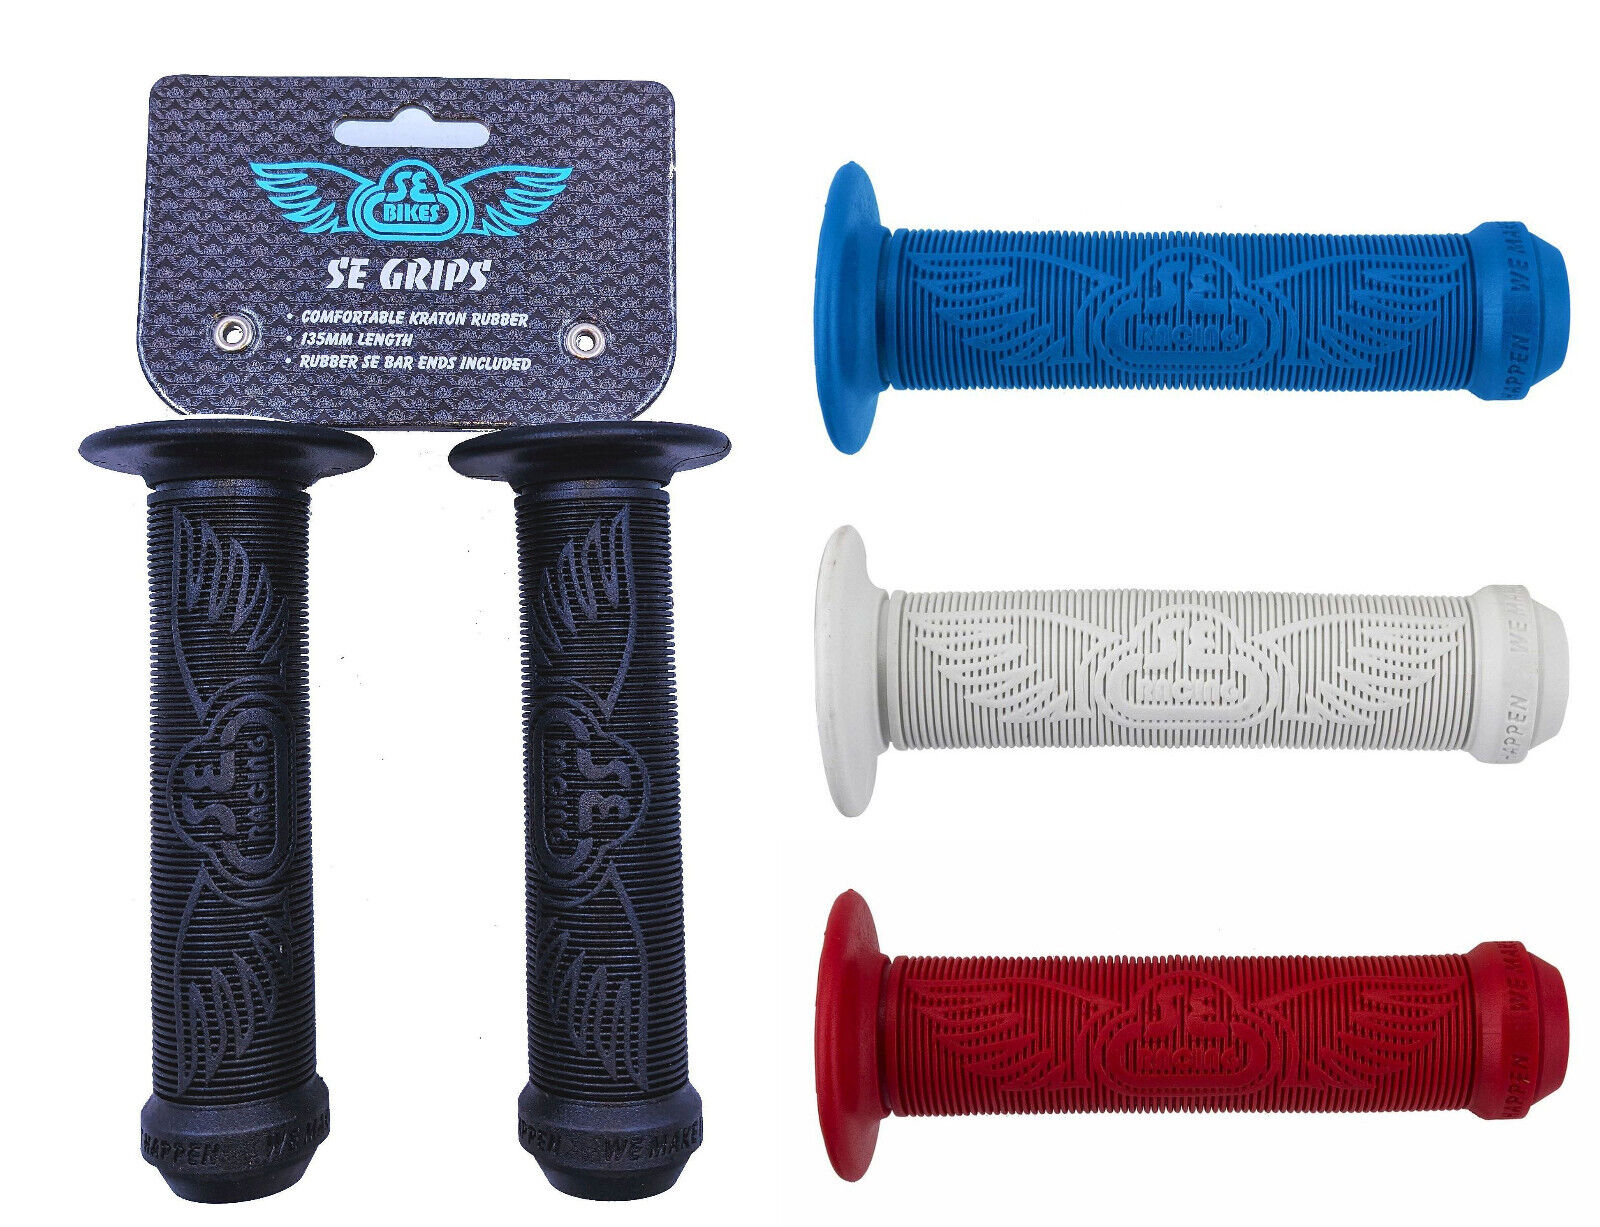 SE BIKES WINGS Flanged Grips Comfort & Control BMX Bike Choose Color - The Bikesmiths